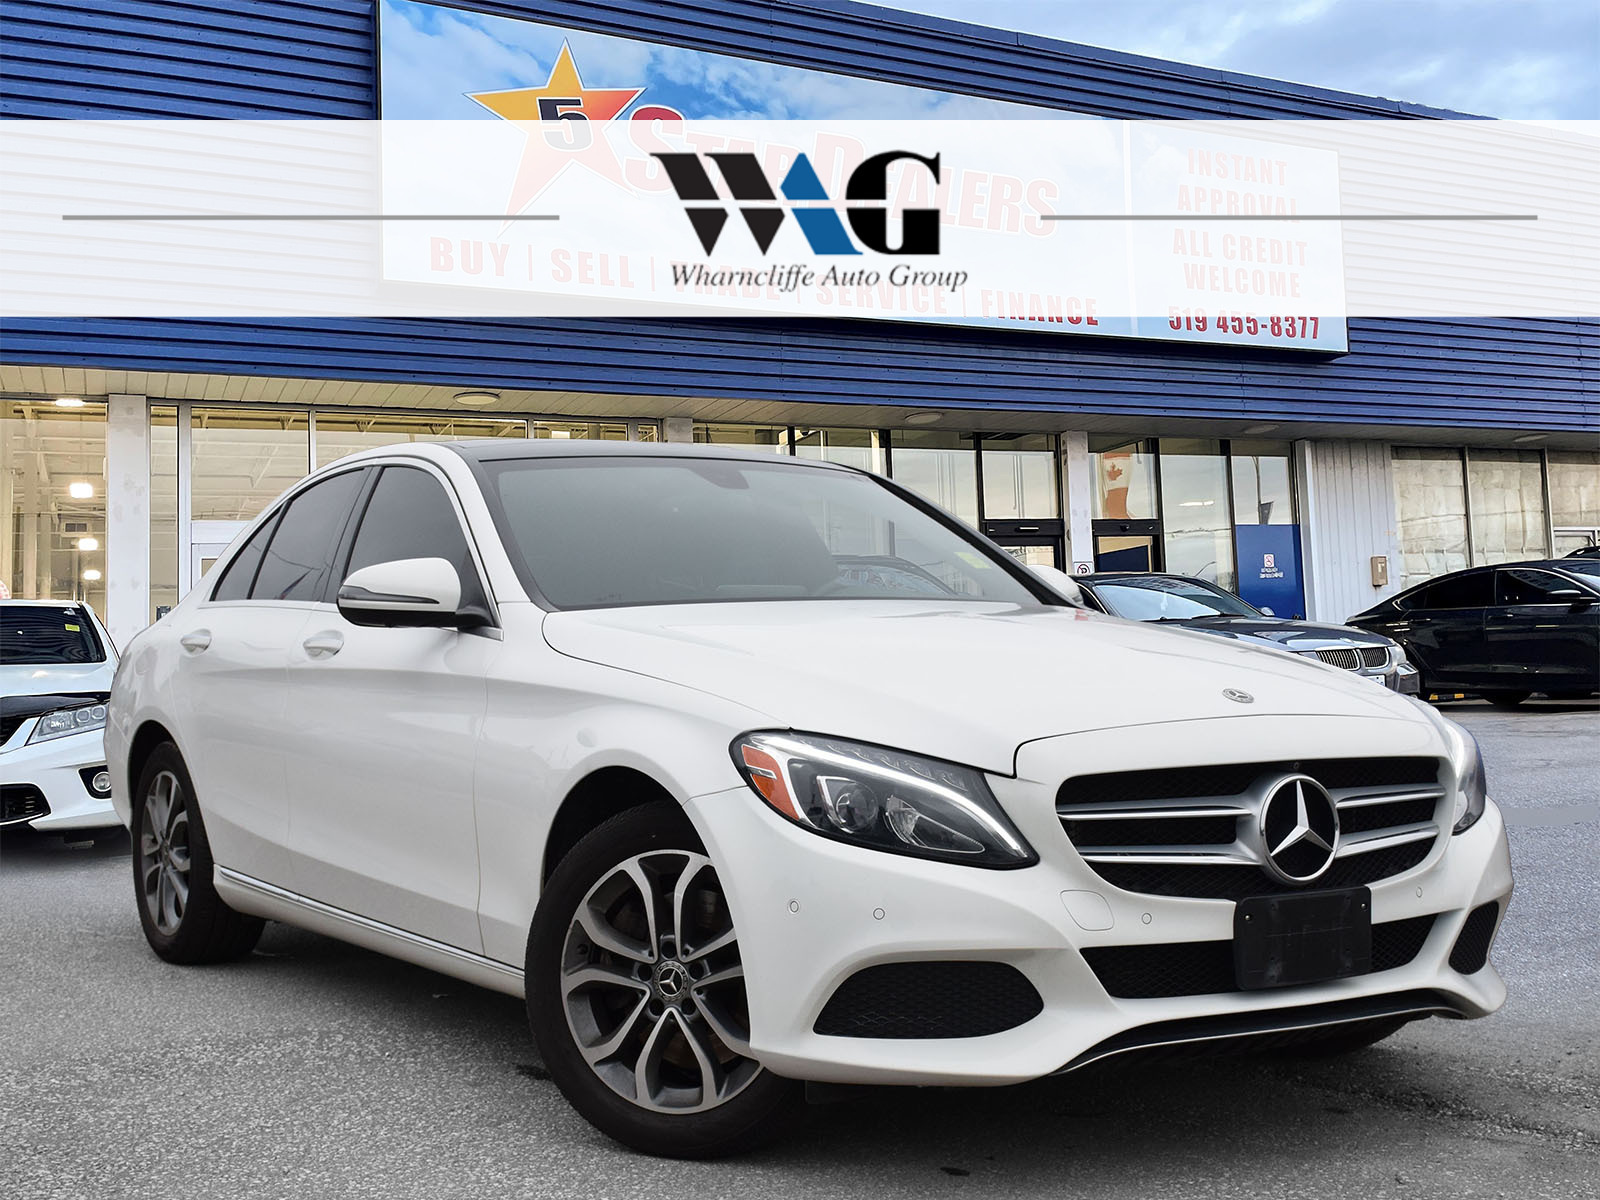 2018 Mercedes-Benz C-Class NAV LEATHER PANO ROOF MINT! WE FINANCE ALL CREDIT!